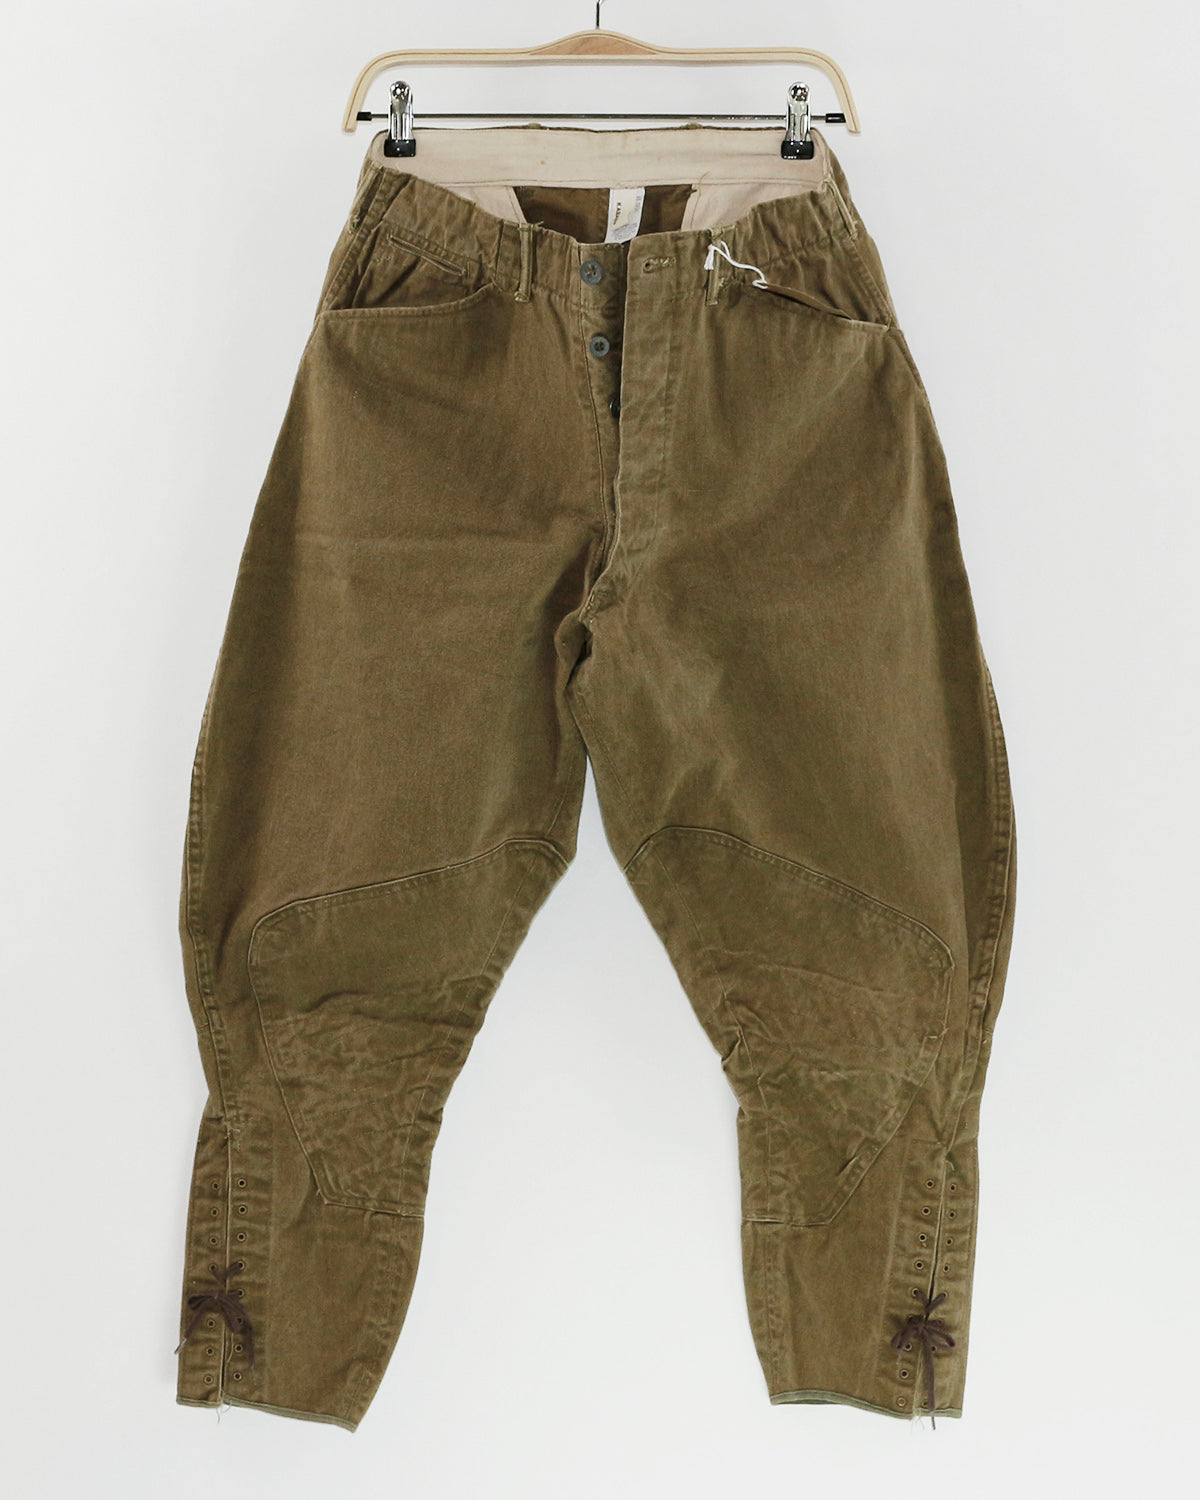 Vintage WWI US Army Breeches